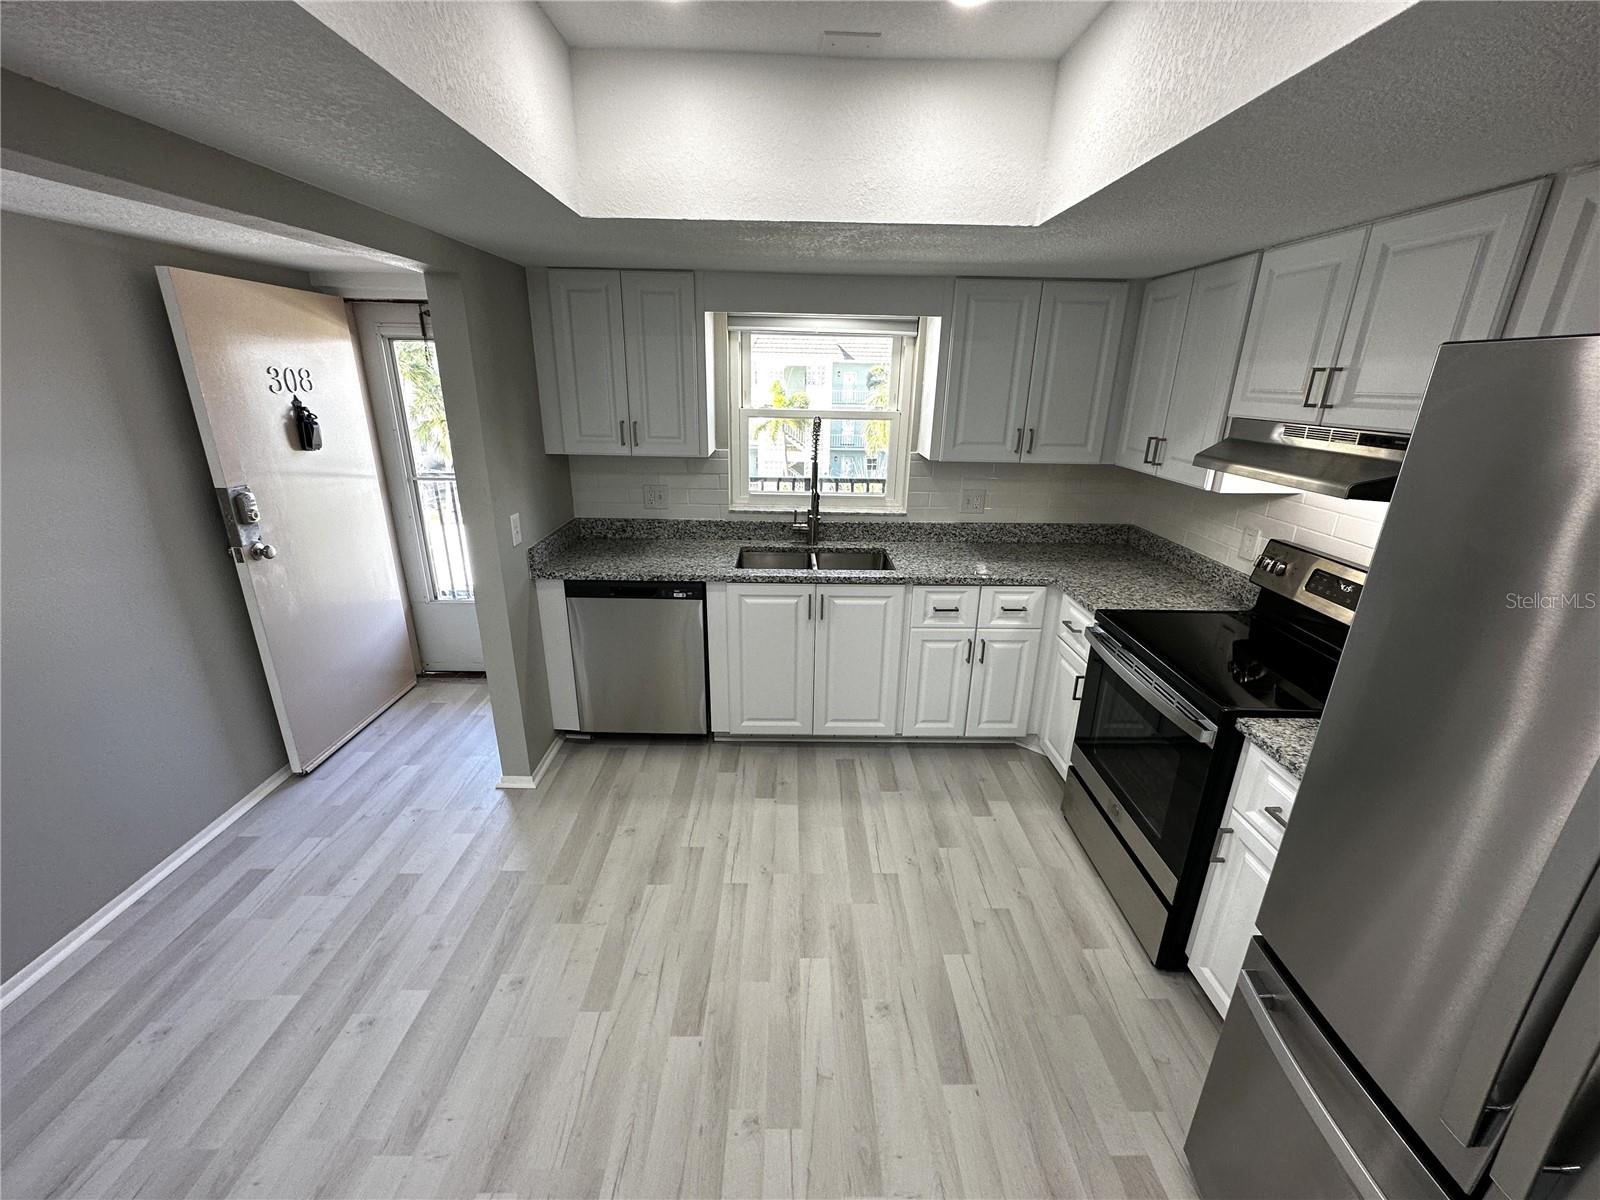 Fully updated Kitchen with Granite Counters and all new stainless appliances